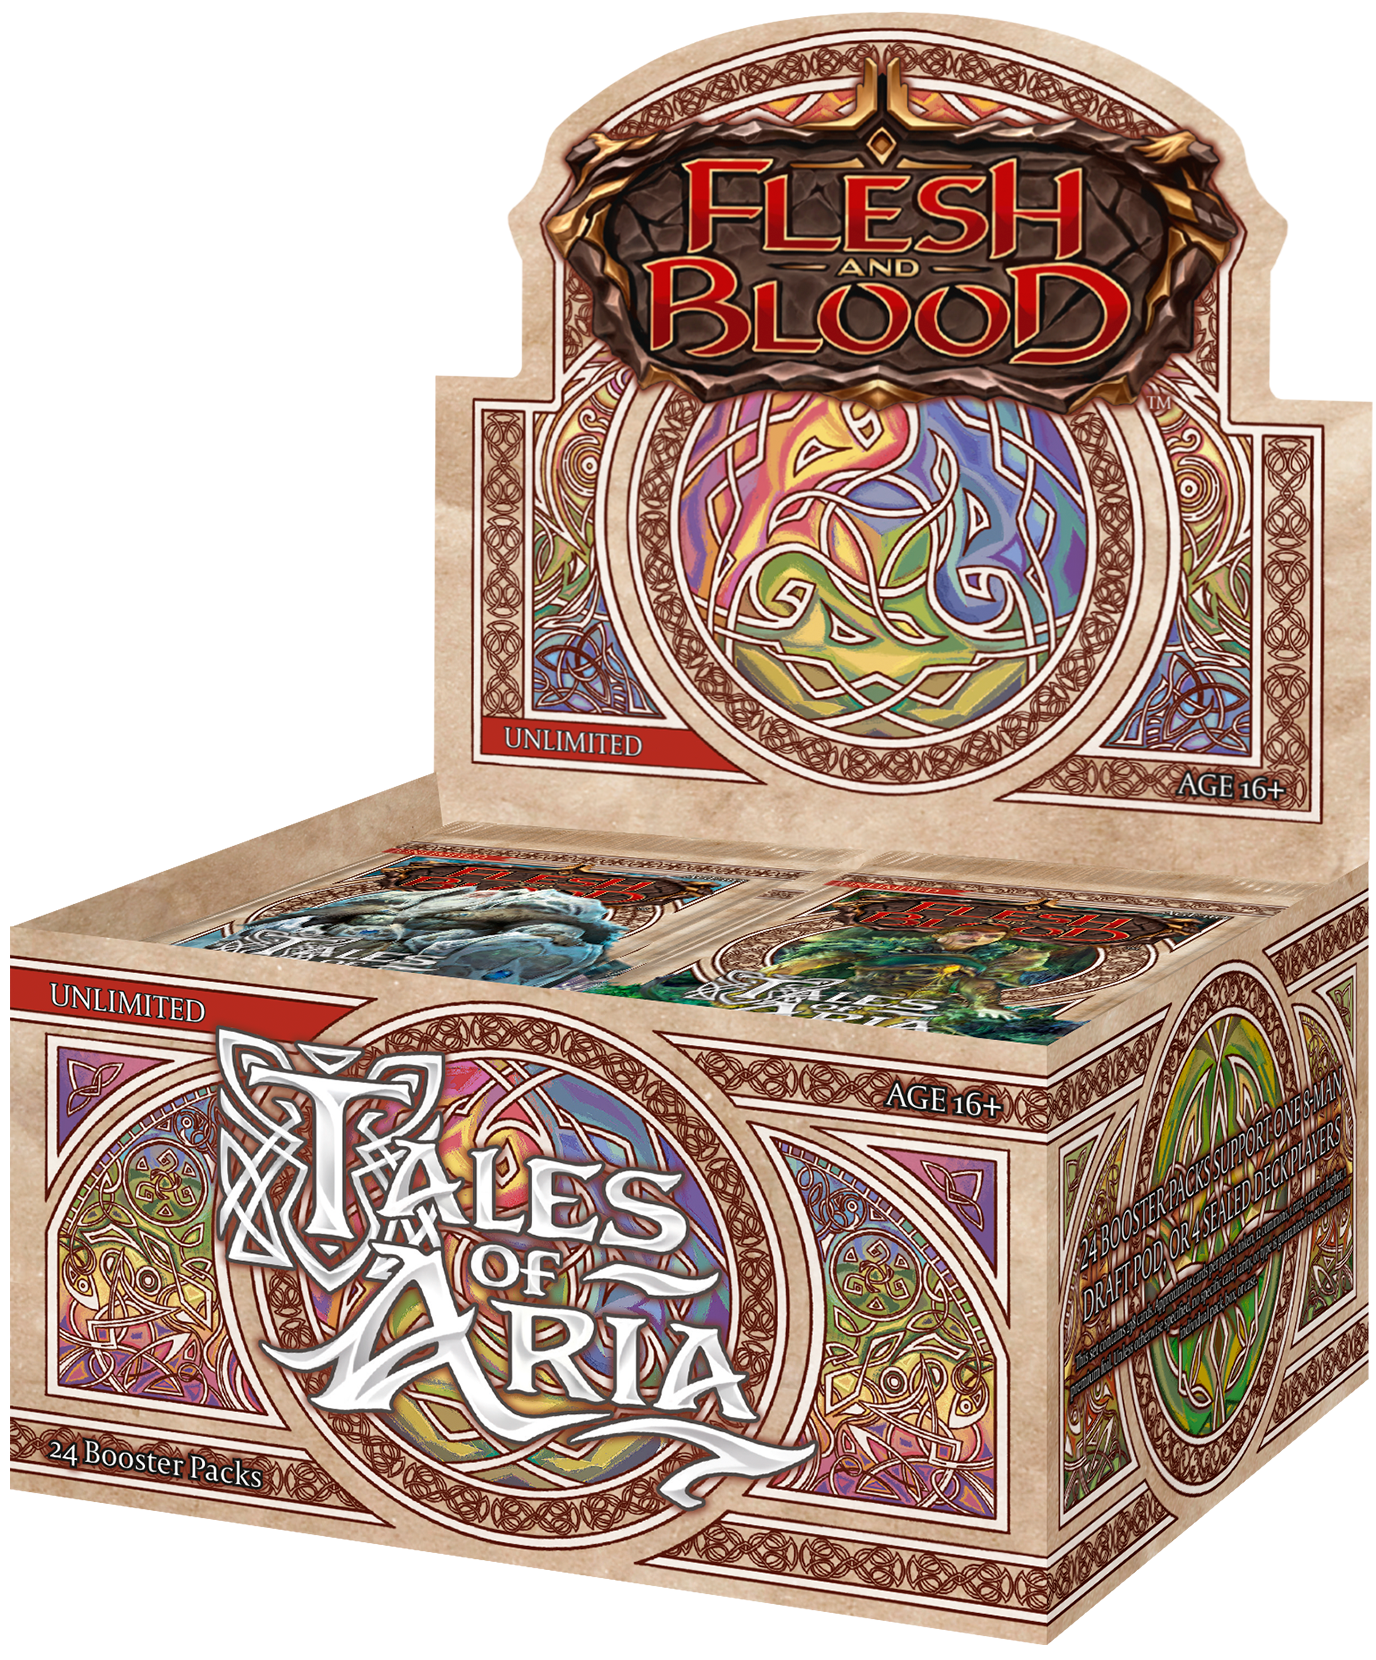 FLESH AND BLOOD TALES OF ARIA UNLIMITED BOOSTER BOX | Jack's On Queen